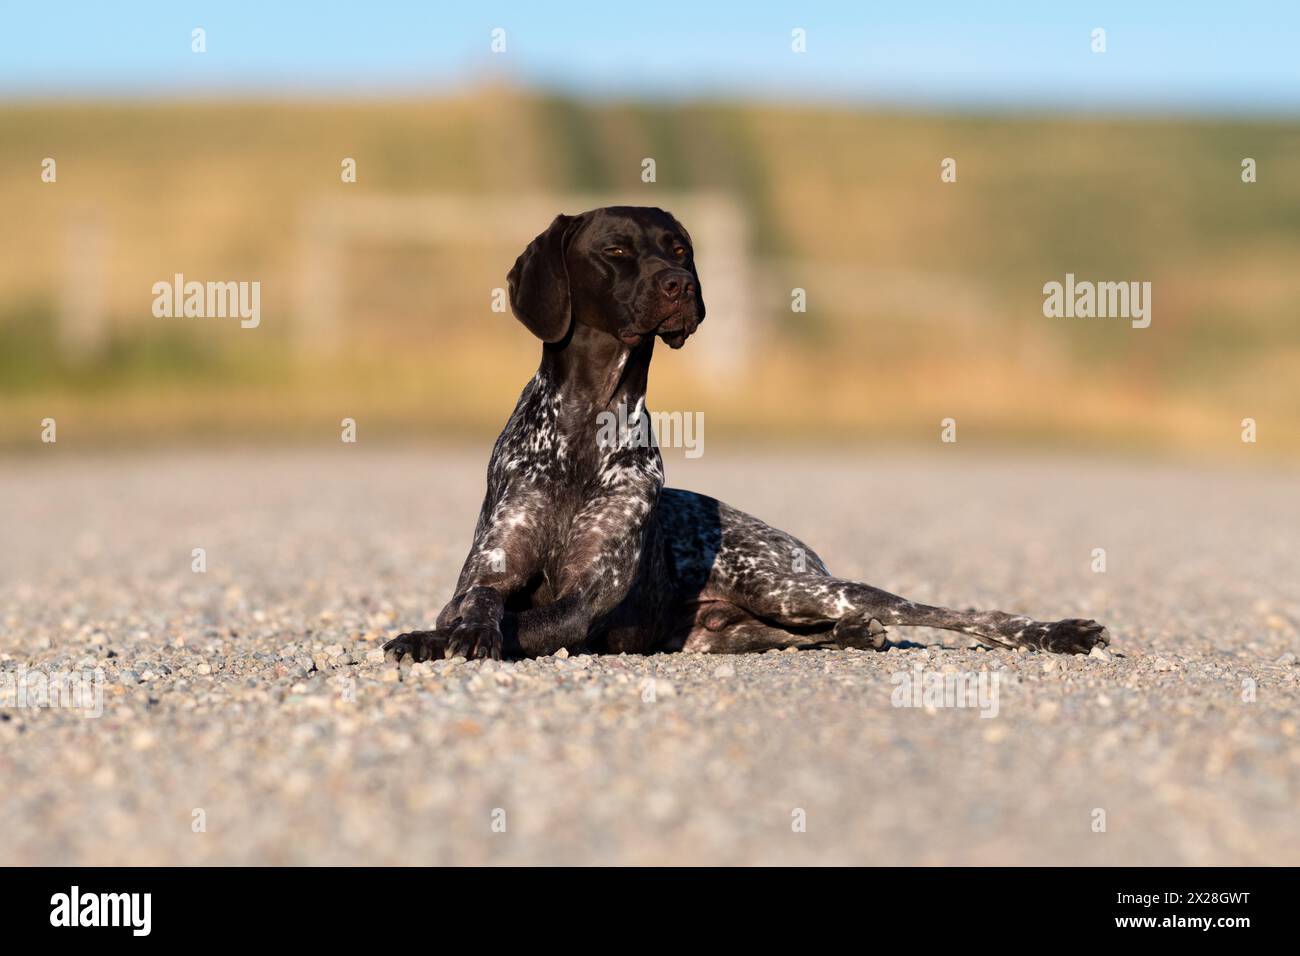 German short haired pointer ( GSP ) liver roan & ticked coat. Posing for portraits down a backroad on the southern Alberta prairies. Stock Photo